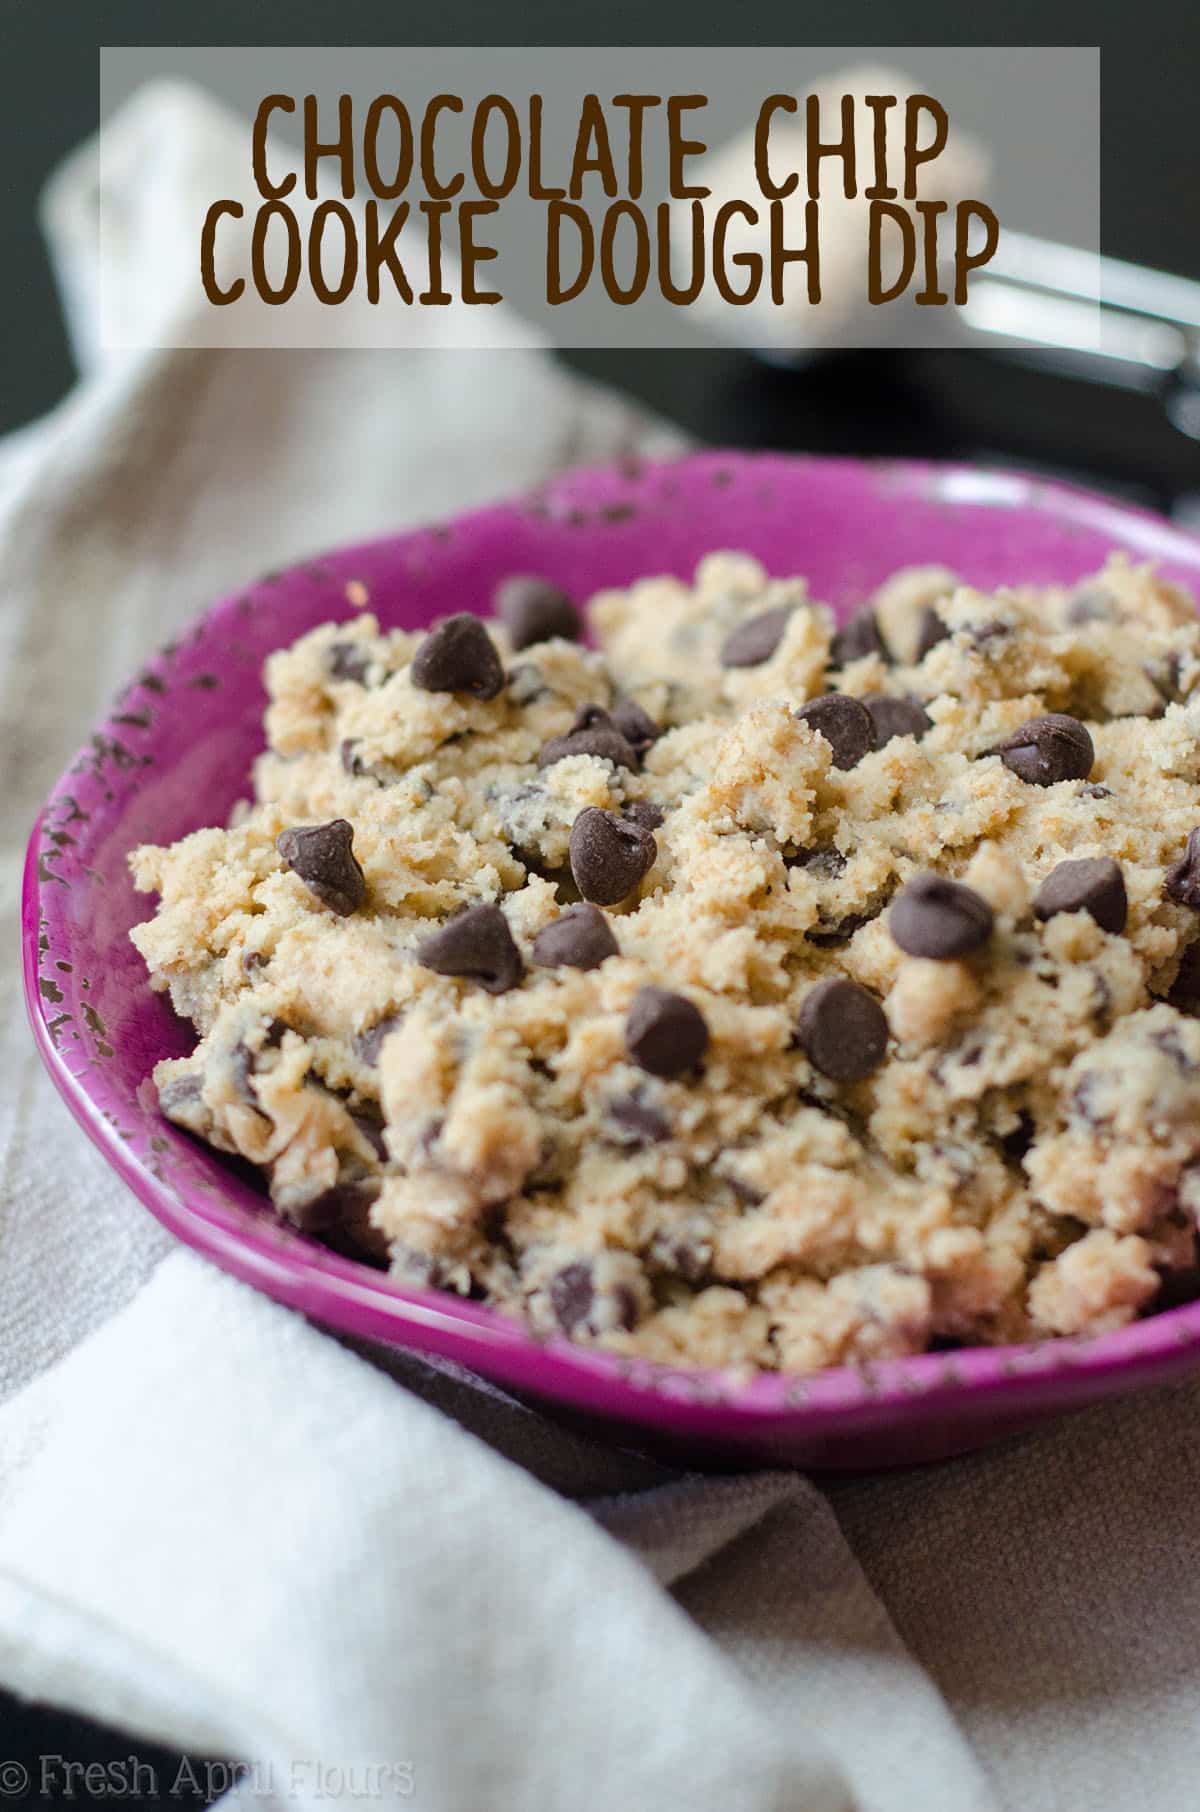 Chocolate Chip Cookie Dough Dip: Safe-to-eat eggless cookie dough ready to eat with a spoon or a dipper! via @frshaprilflours